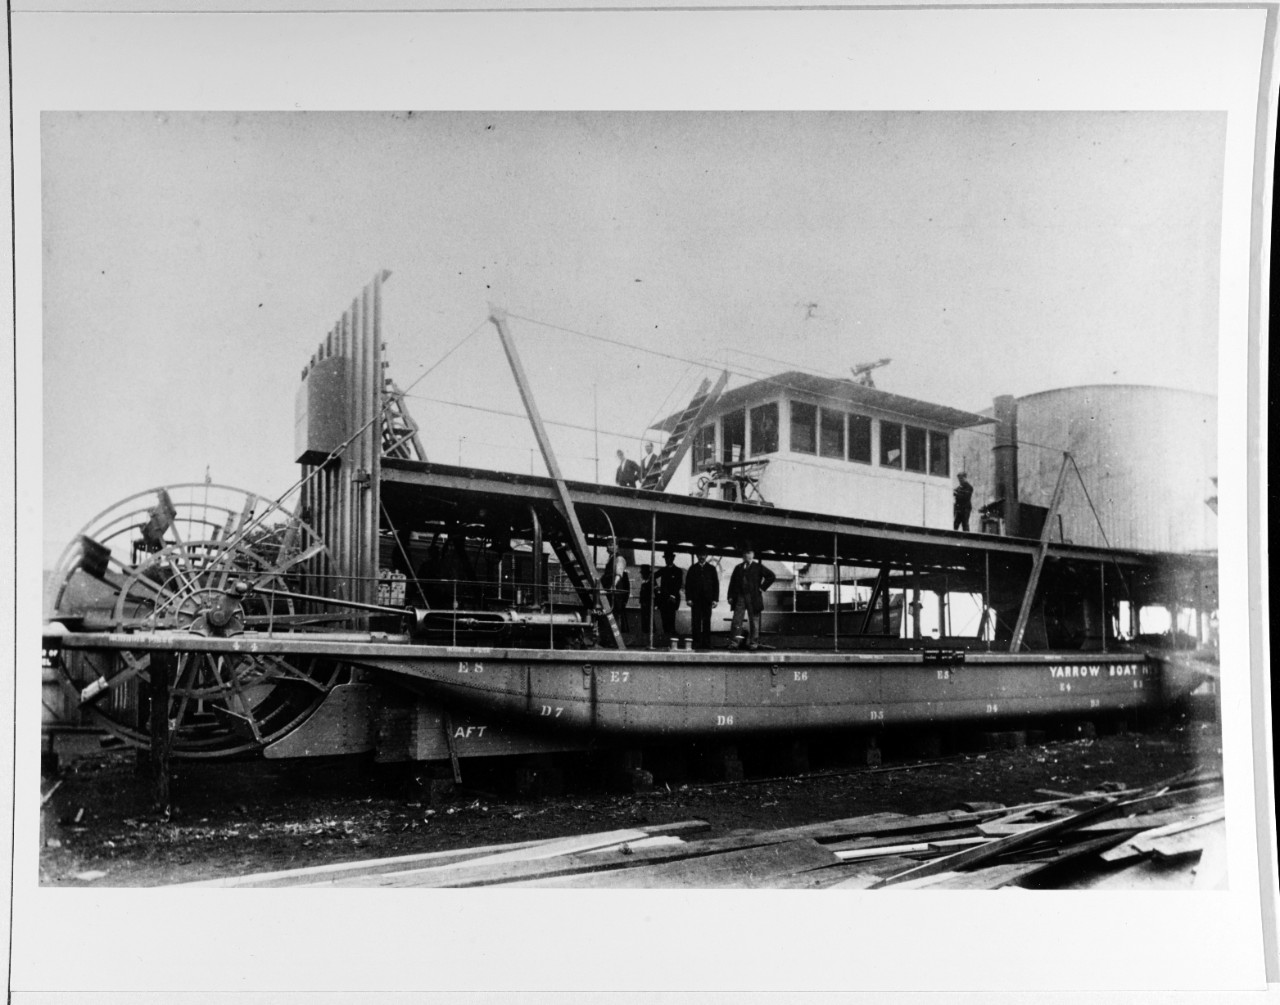 Yarrow boat, no. 2. Built by Messrs. Yarrow and Co. for the Nile expedition in 17 days.